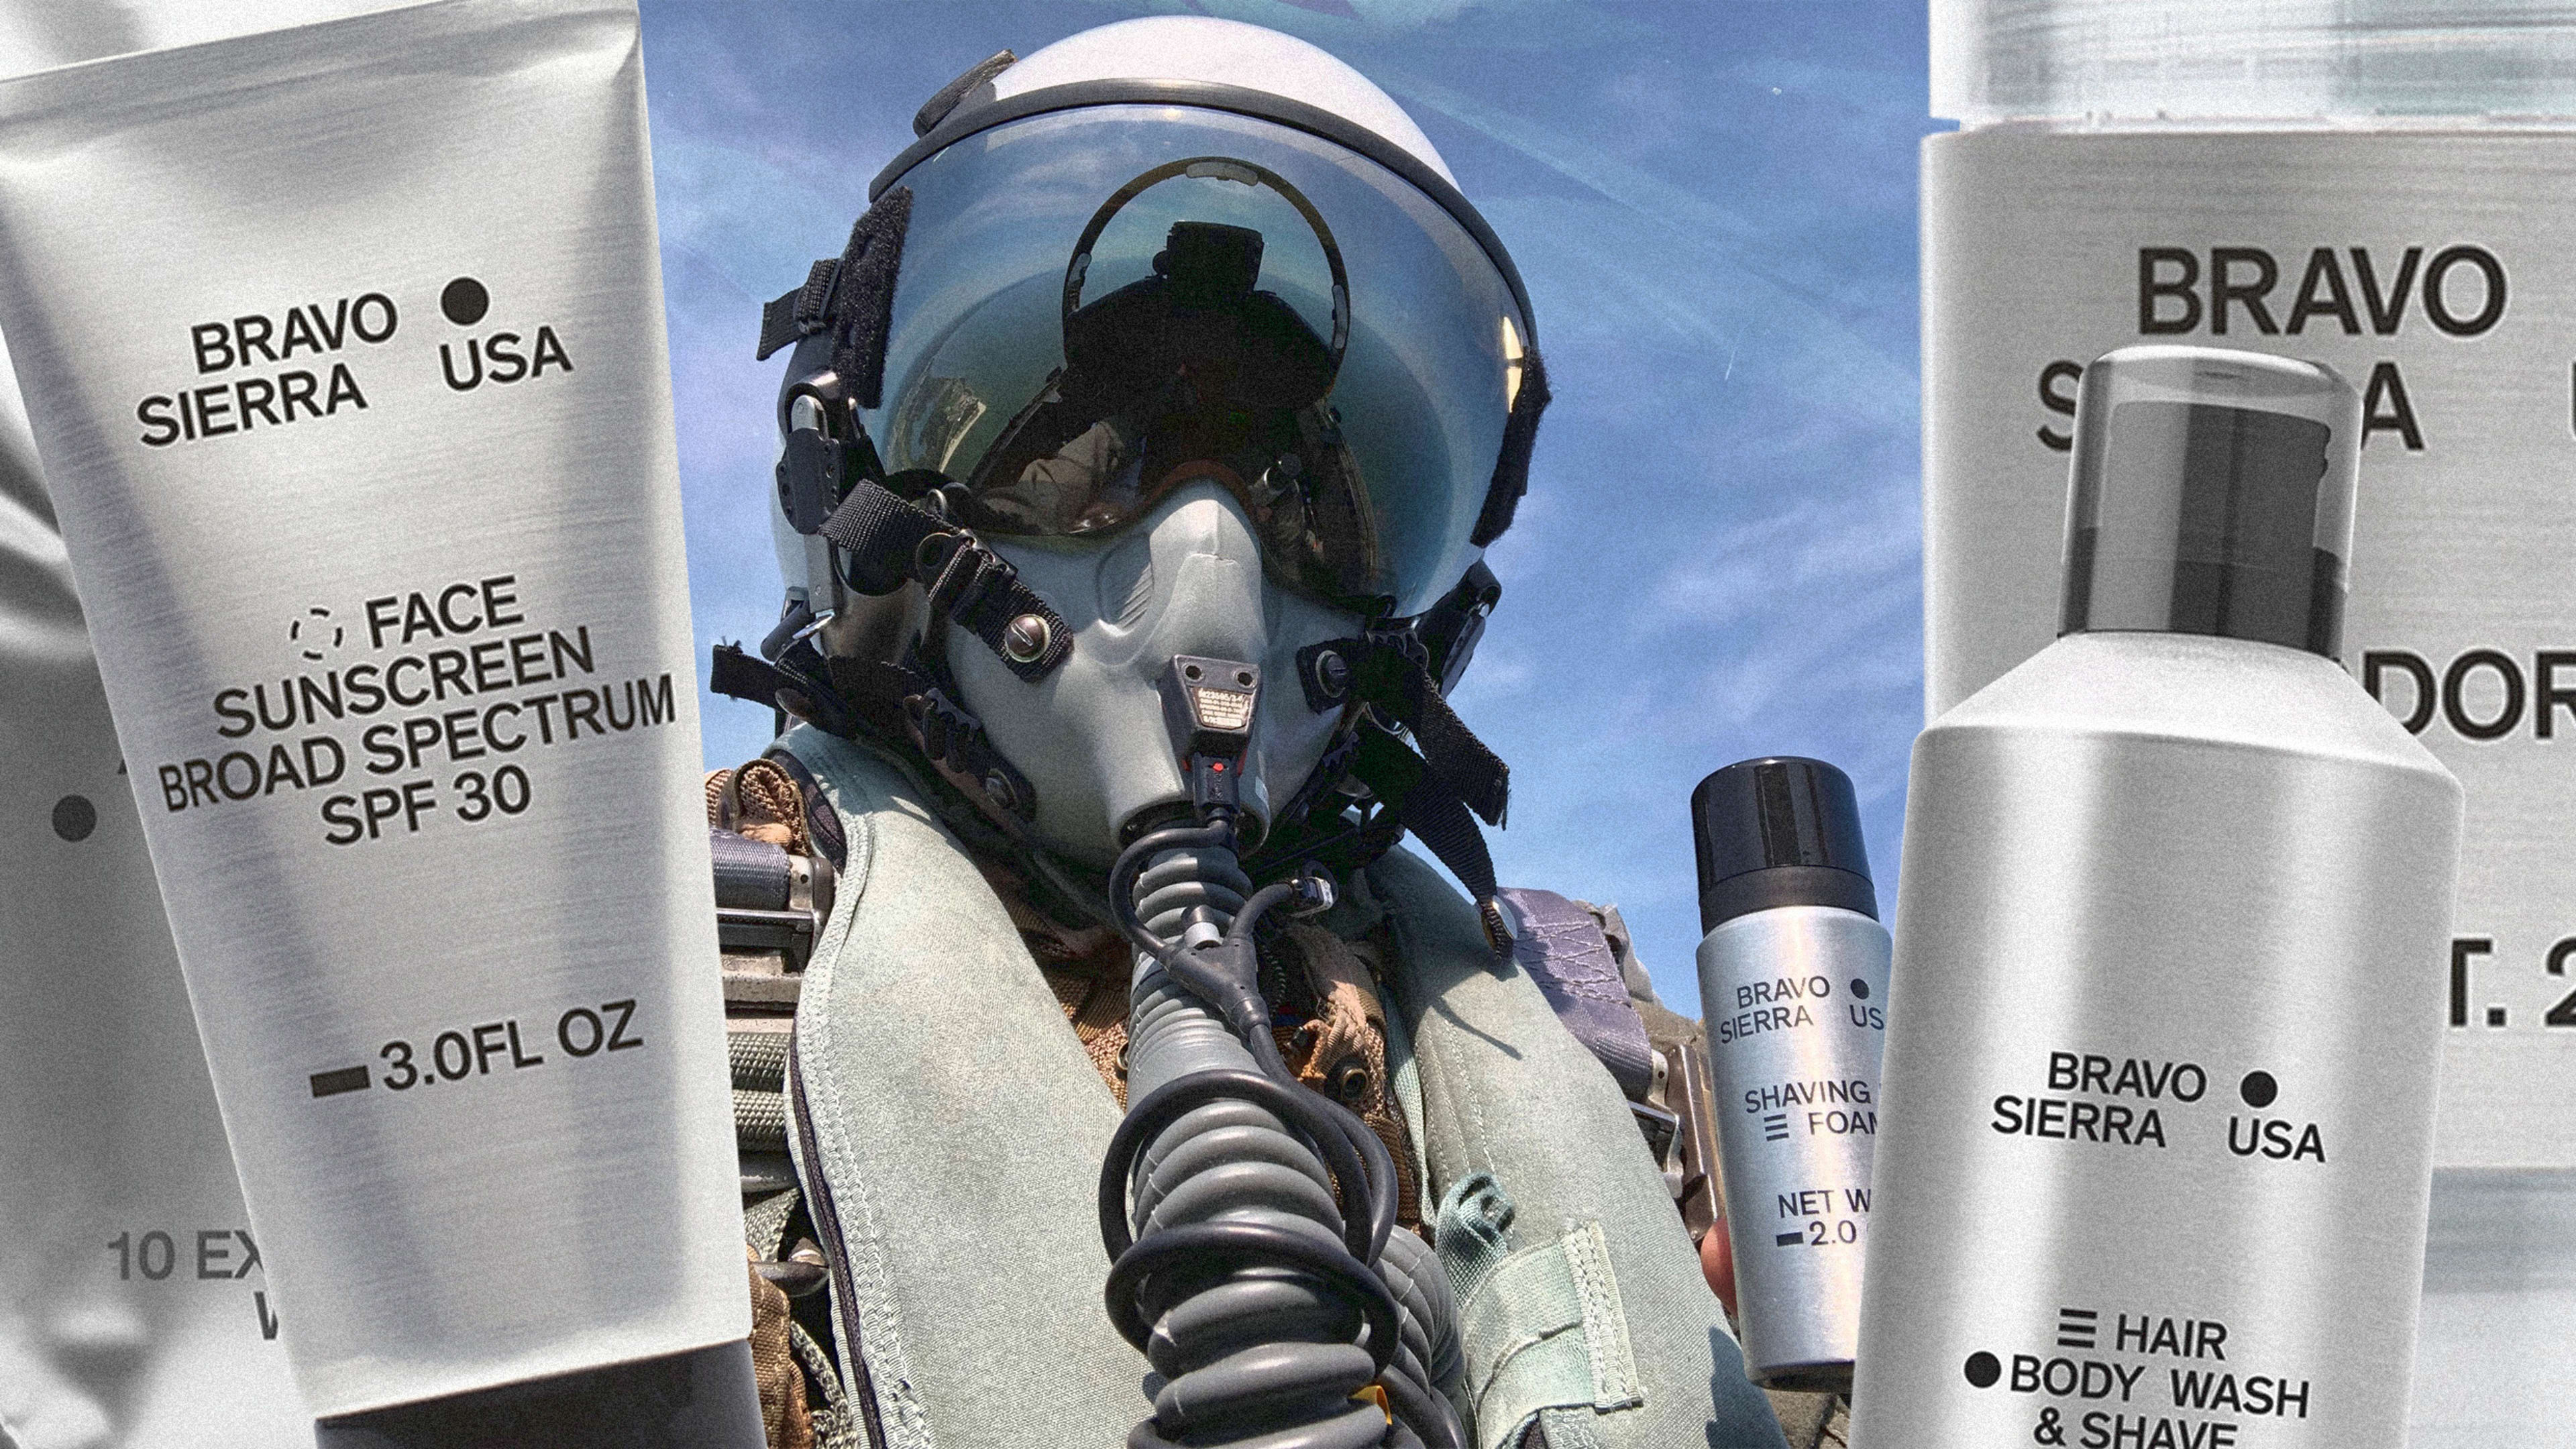 Battlefield-tested skincare: This brand tested its entire line with the military